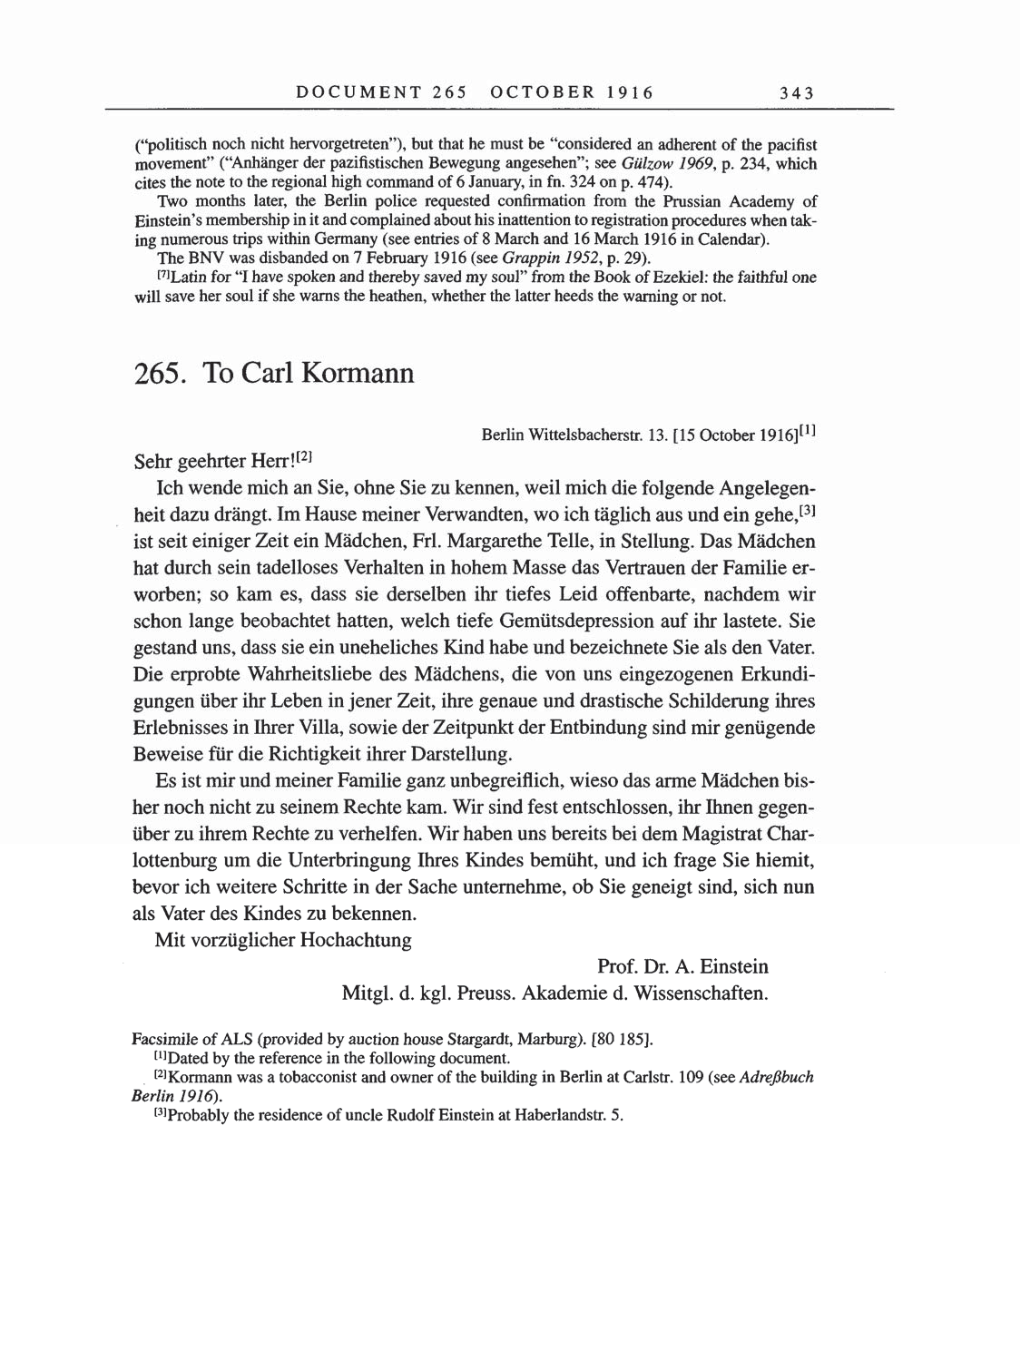 Volume 8, Part A: The Berlin Years: Correspondence 1914-1917 page 343